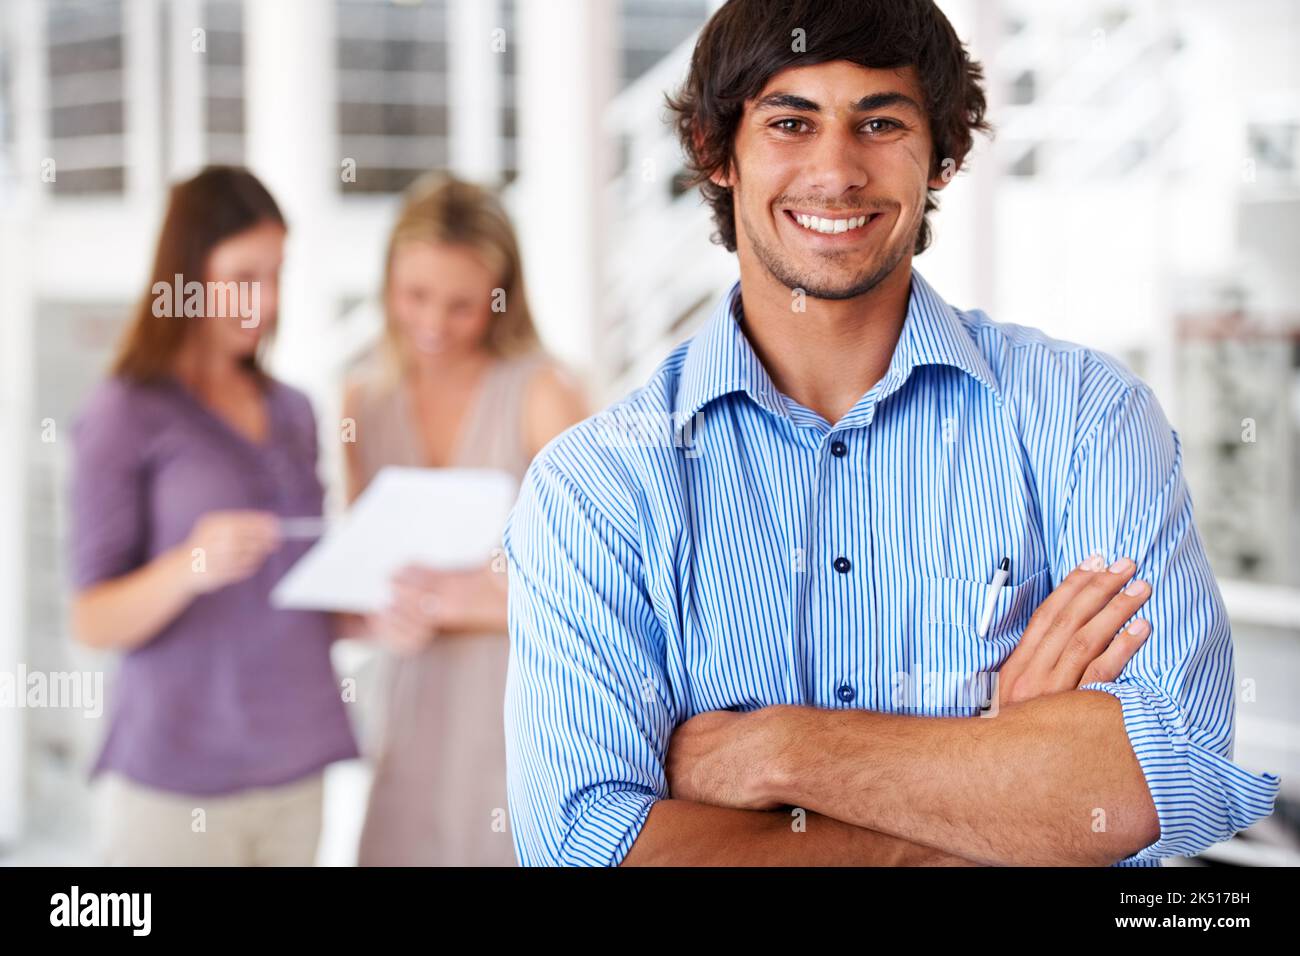 Im taking my team to the top. a leader smiling at the camera with colleagues blurred in the background. Stock Photo